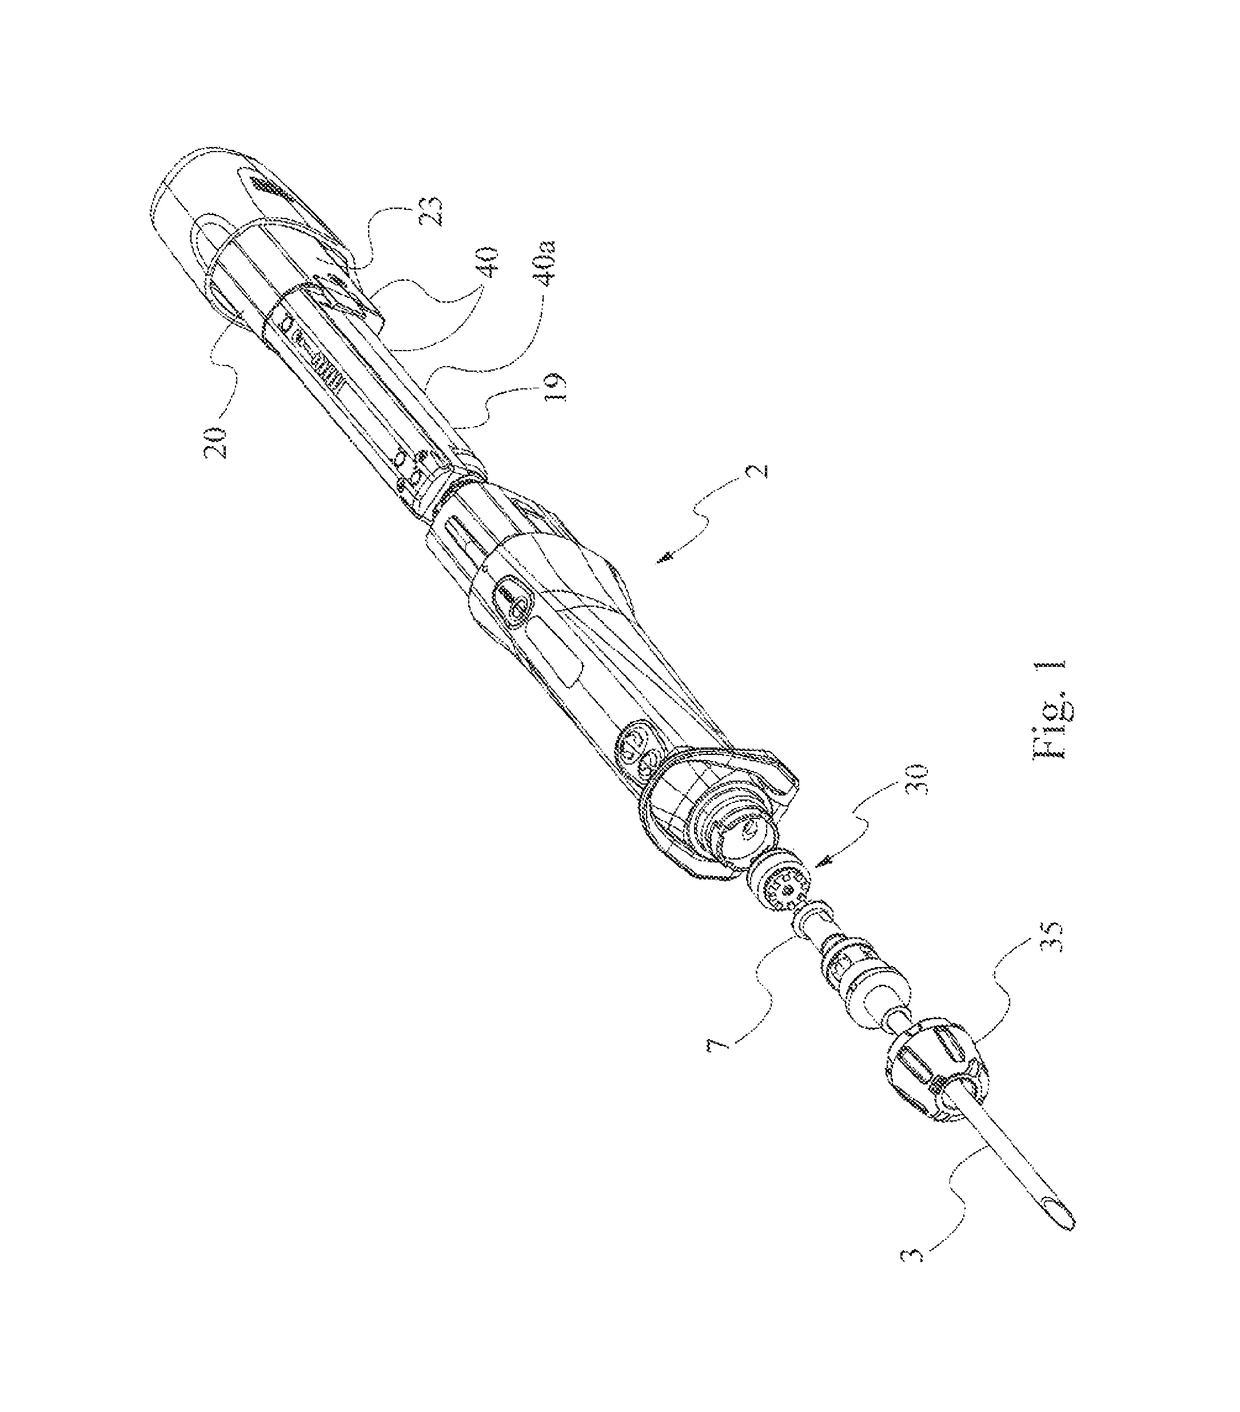 Device for treatments of endoscopic resection/ removal of tissues